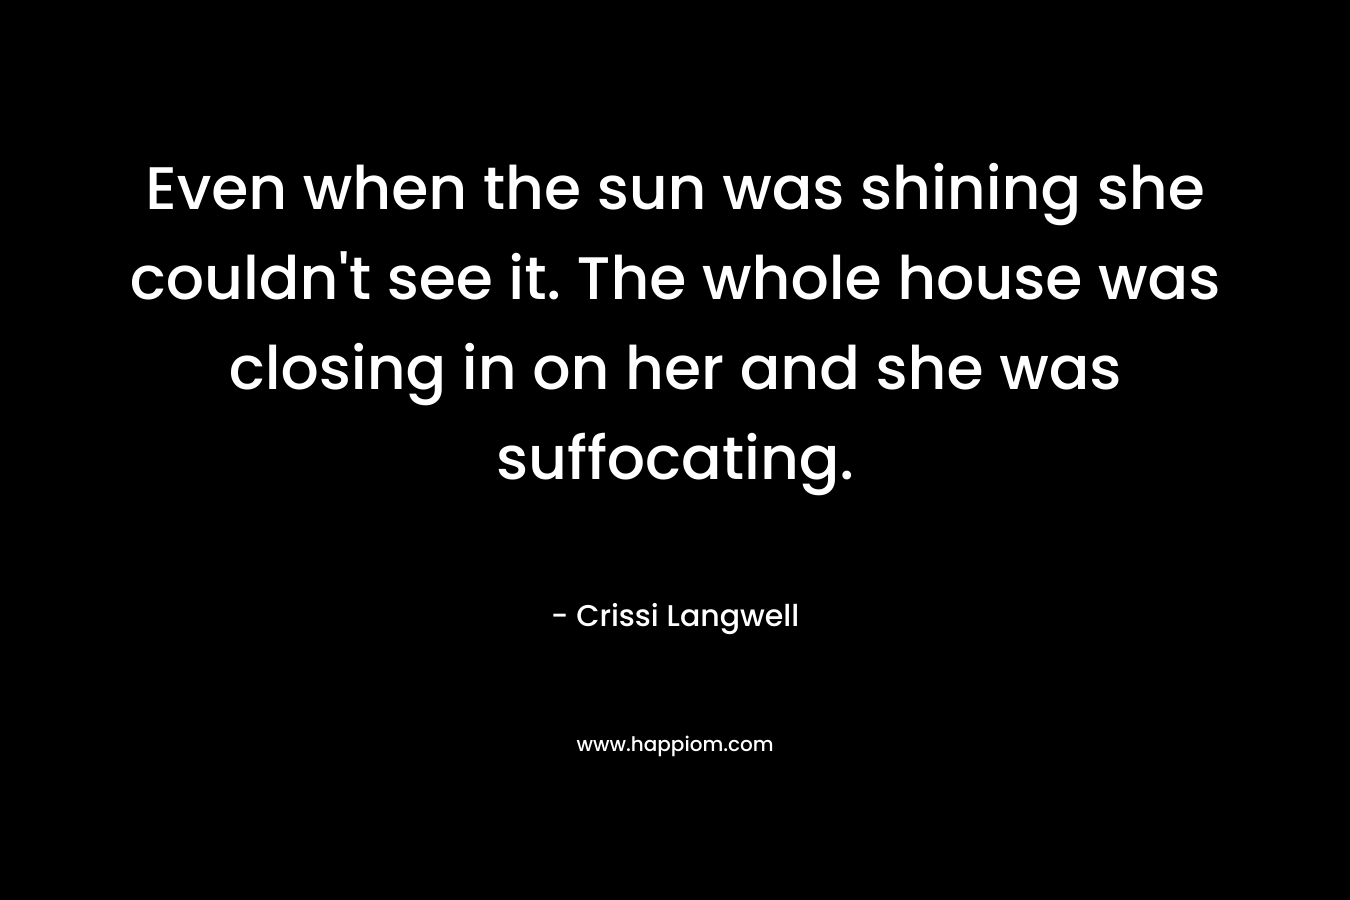 Even when the sun was shining she couldn’t see it. The whole house was closing in on her and she was suffocating. – Crissi Langwell